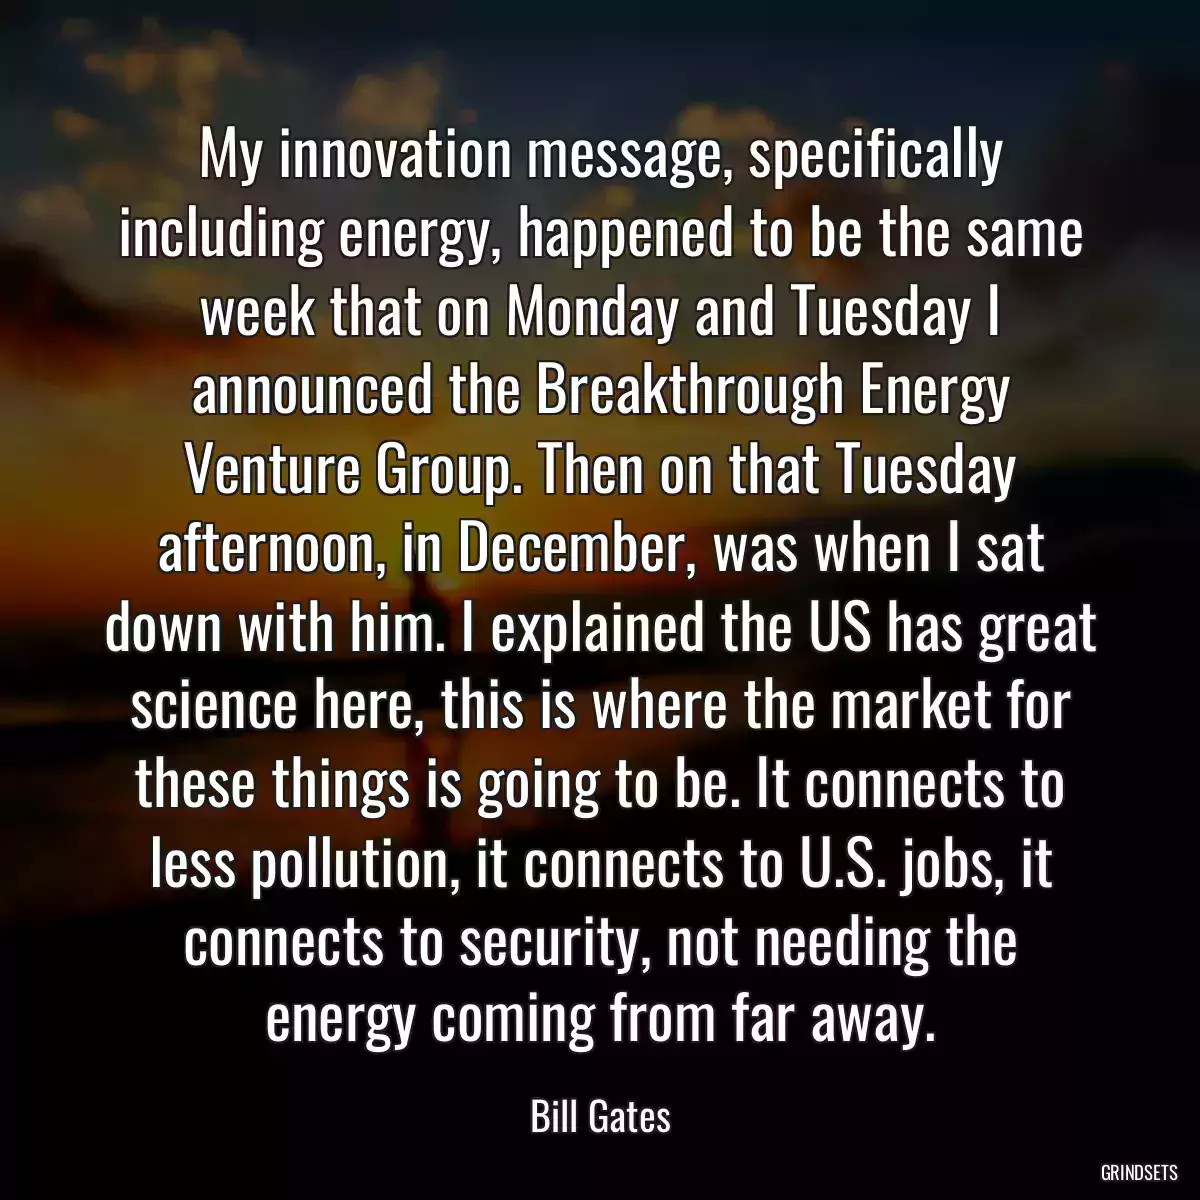 My innovation message, specifically including energy, happened to be the same week that on Monday and Tuesday I announced the Breakthrough Energy Venture Group. Then on that Tuesday afternoon, in December, was when I sat down with him. I explained the US has great science here, this is where the market for these things is going to be. It connects to less pollution, it connects to U.S. jobs, it connects to security, not needing the energy coming from far away.